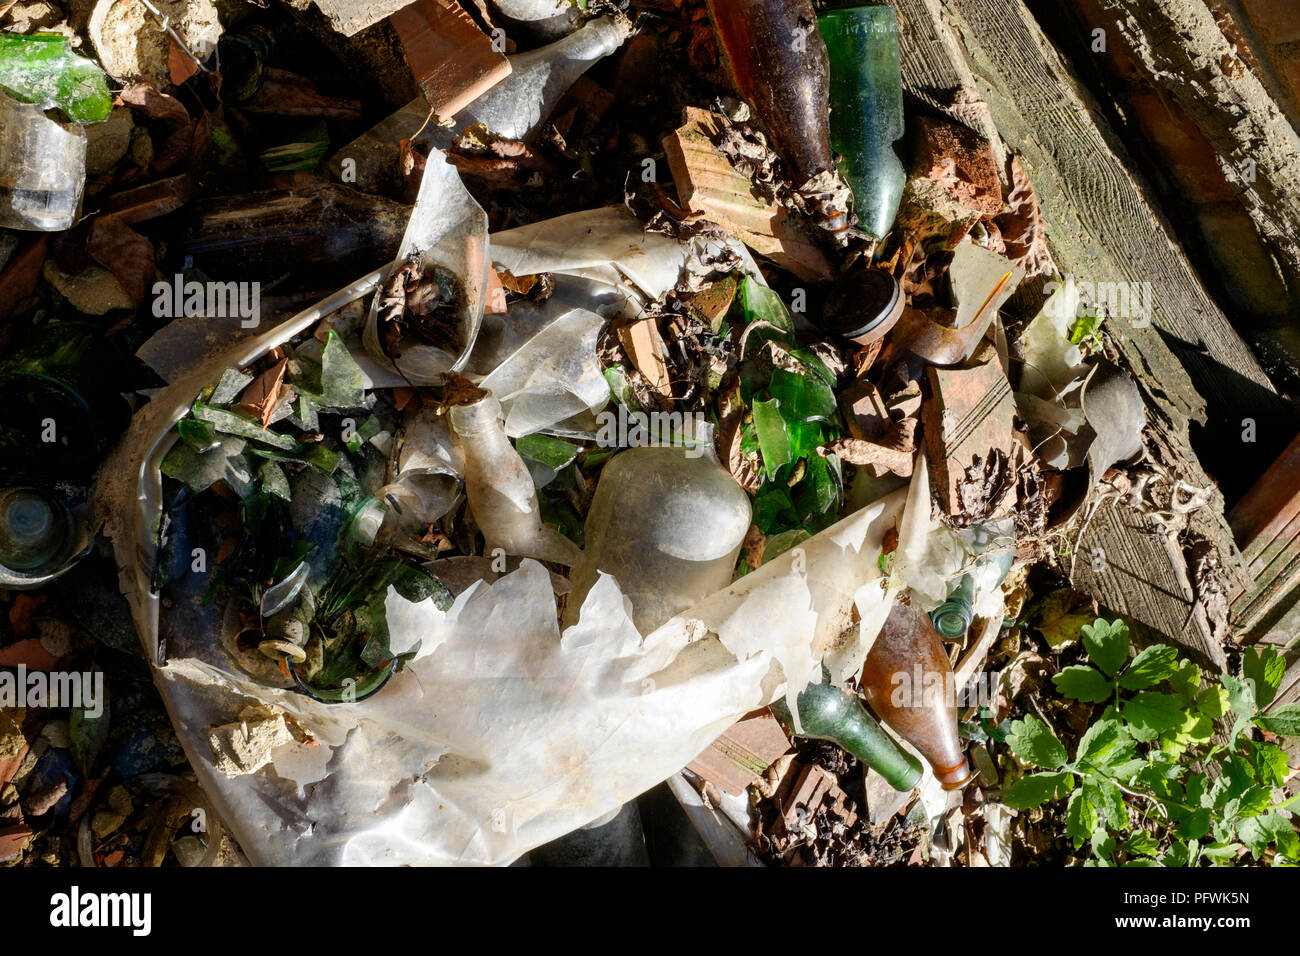 discarded broken glass bottles in a split plastic bag dumped in undergrowth zala county hungary Stock Photo